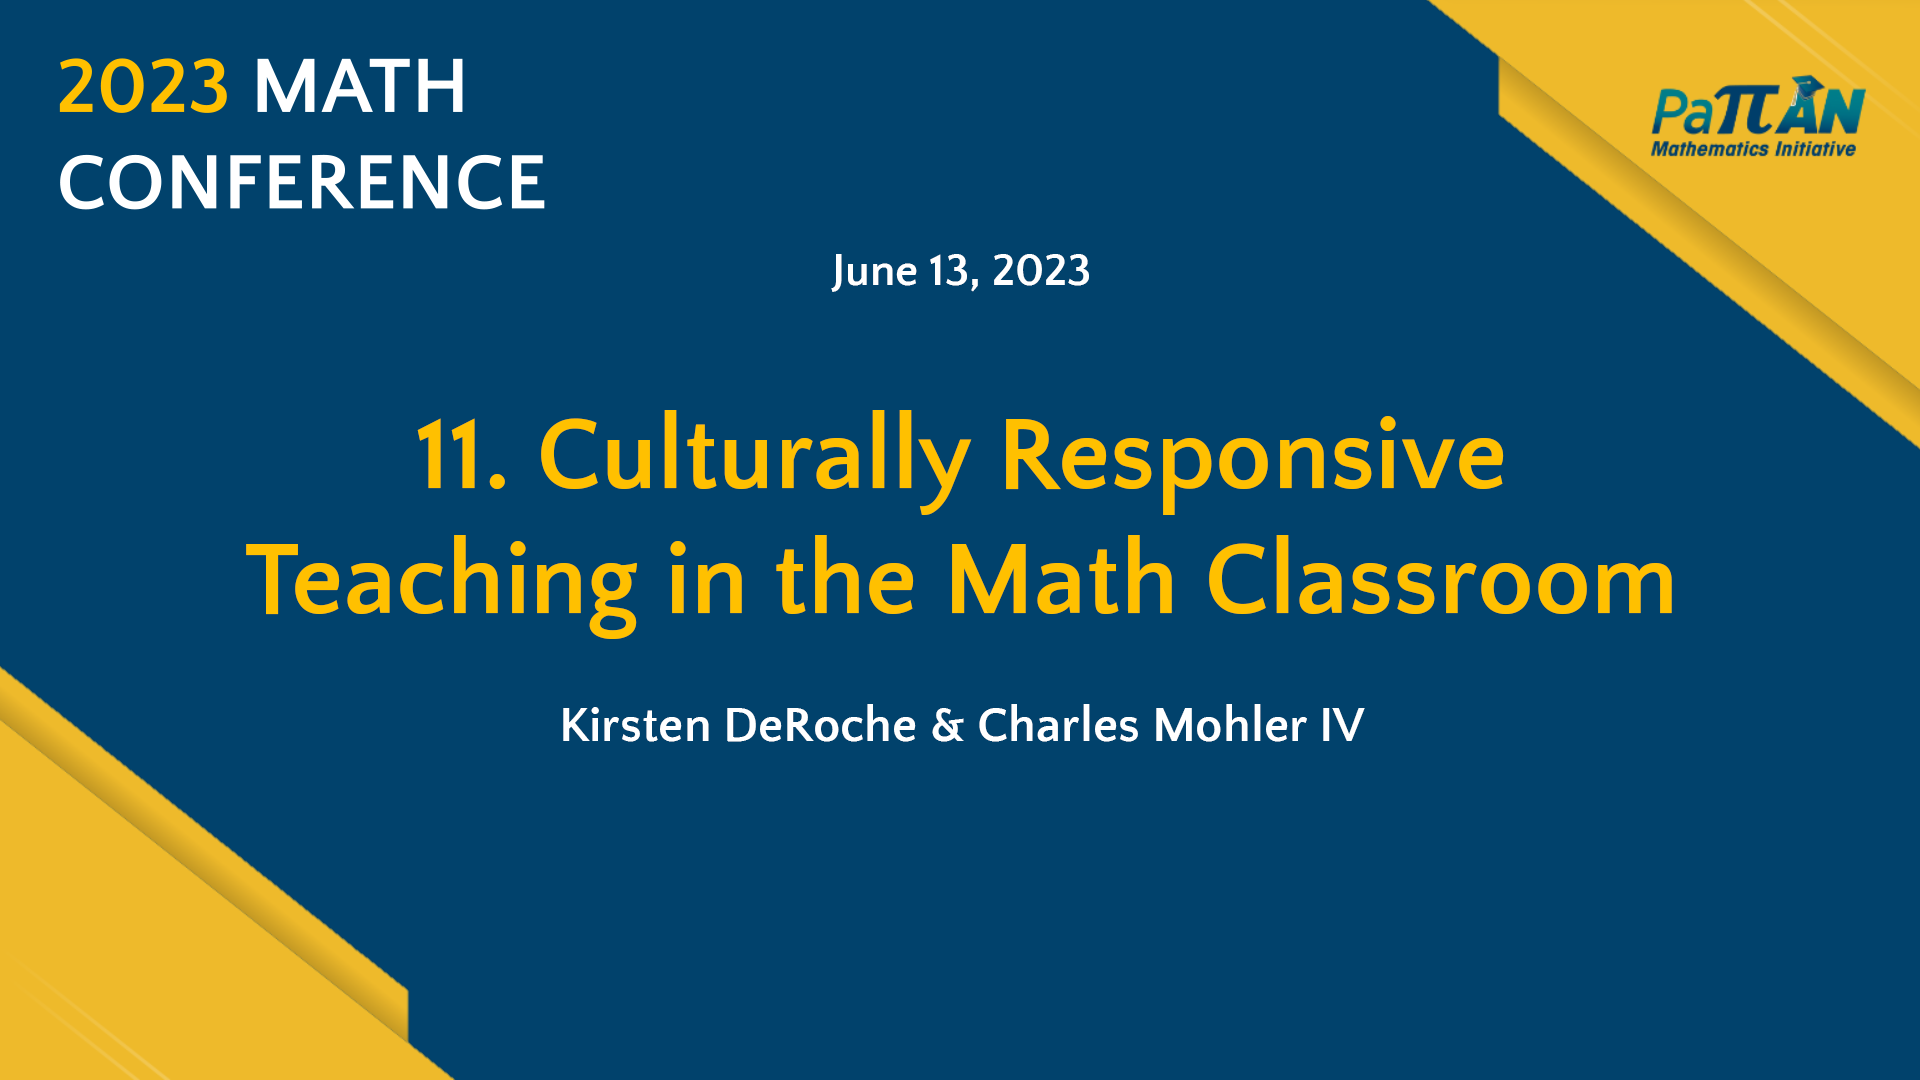 11. Culturally Responsive Teaching in the Math Classroom | Math Conference 2023